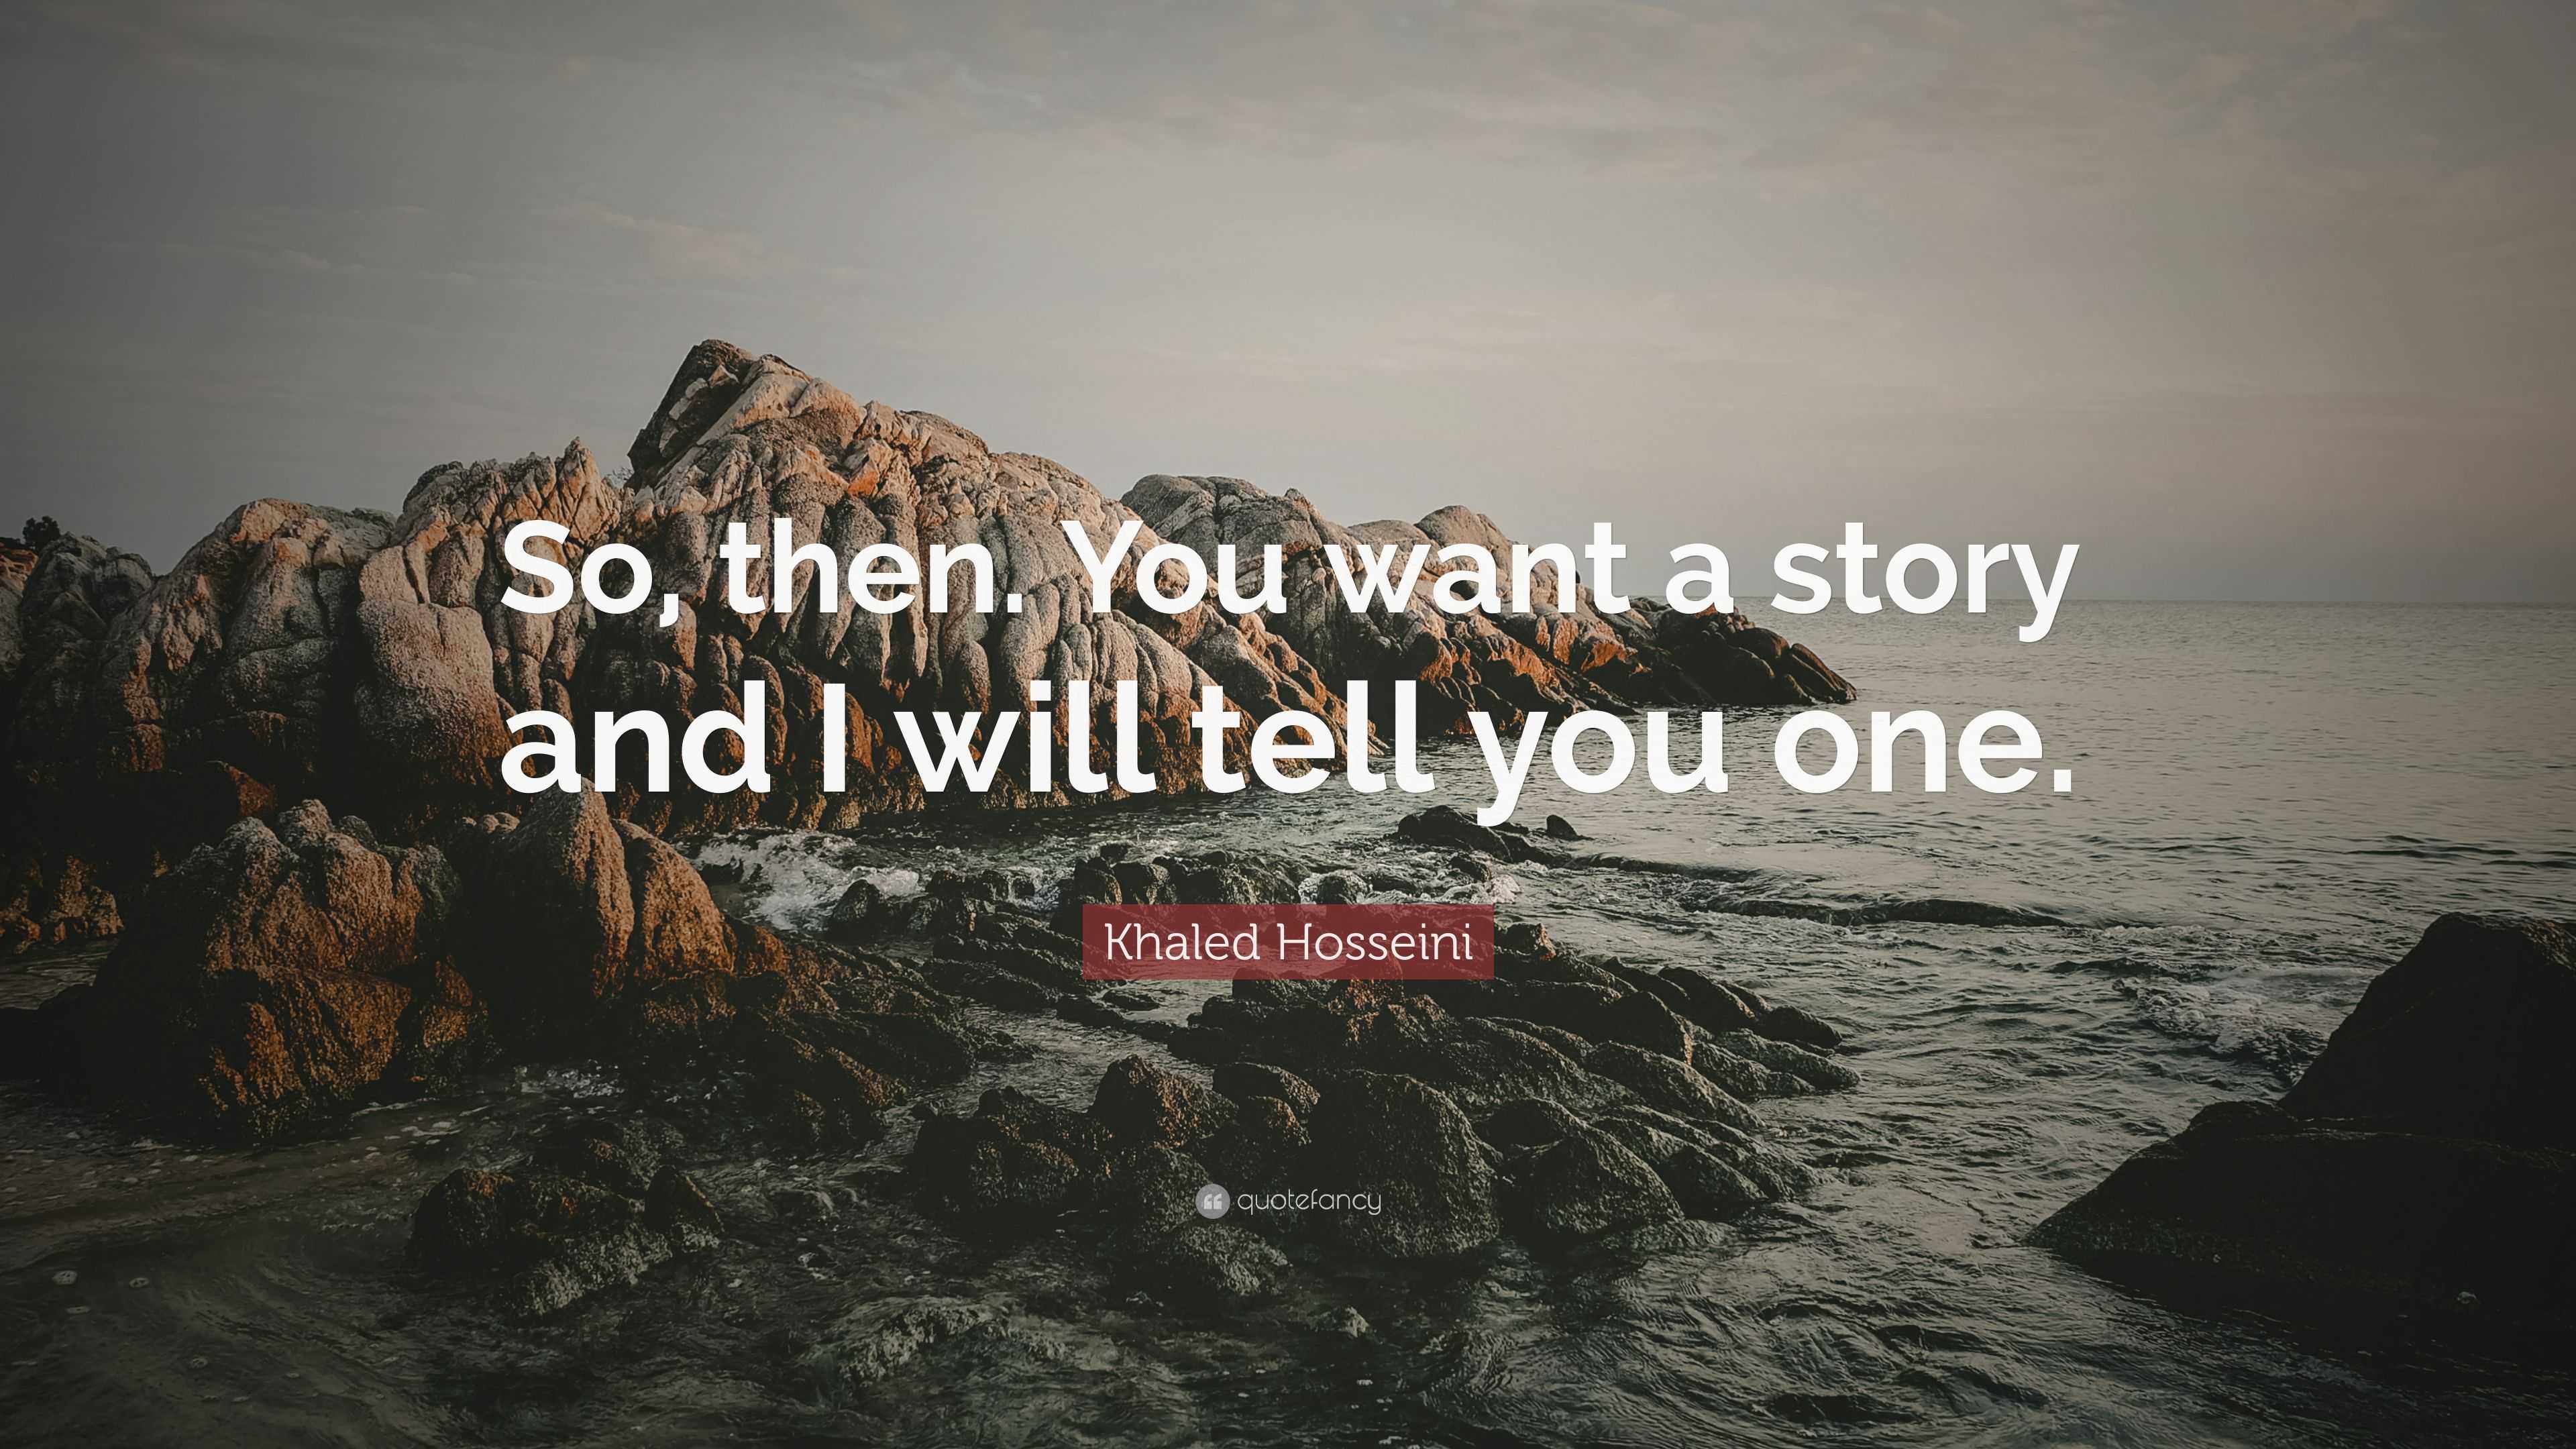 Khaled Hosseini Quote: â€œSo, then. You want a story and I will tell you